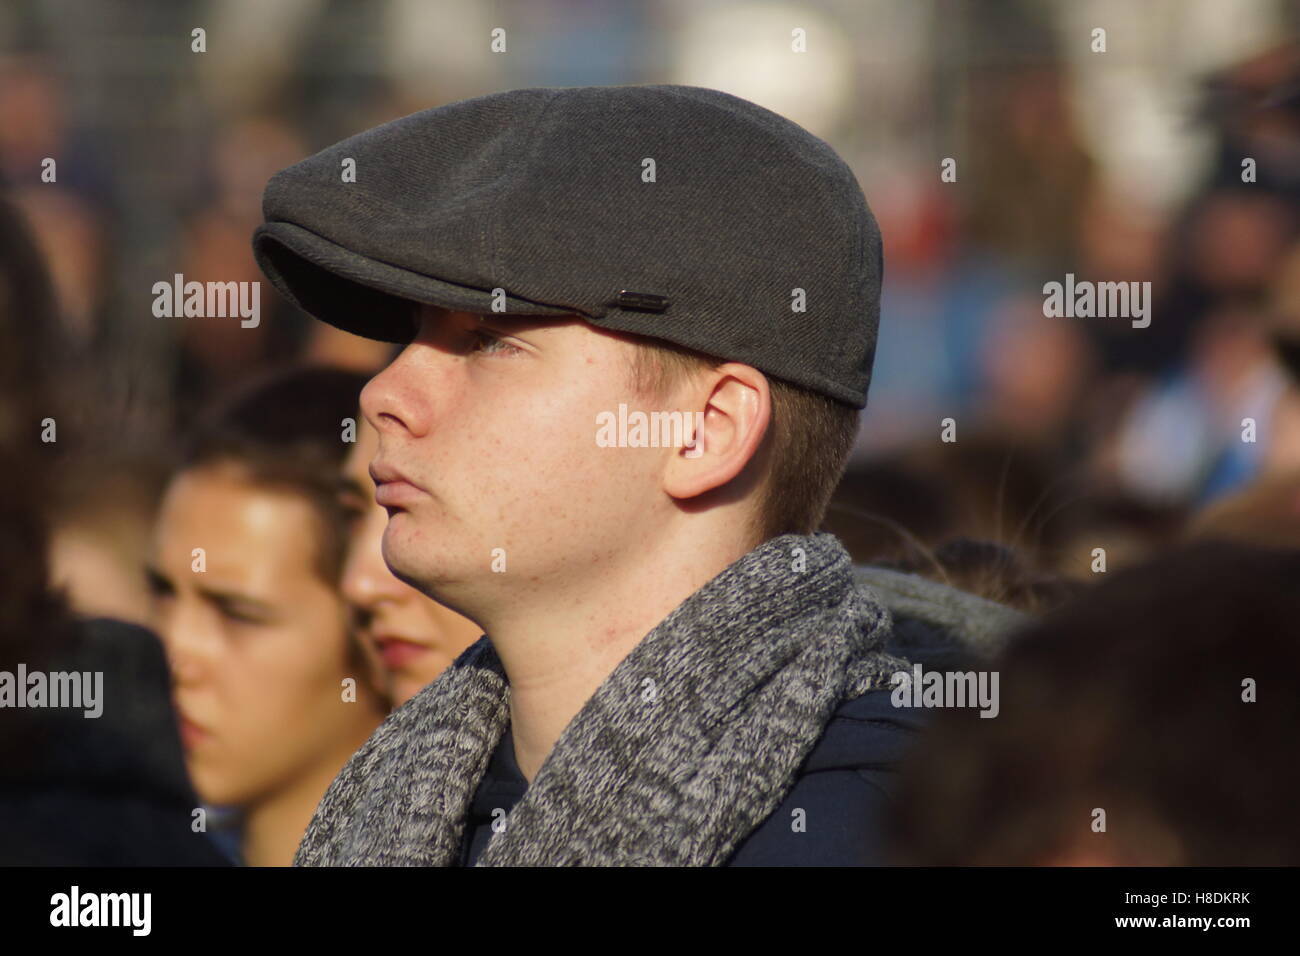 London, England. 11 November 2016. The Royal British Legion marks Remembrance Day in Trafalgar Square, London,  with SILENCE IN THE SQUARE featuring Ben Shephard,  Dave Arch and Tommy Blaize from STRICTLY COME DANCING, Sophie Thompson and Charlie Clements from EASTENDERS, VOX FORTURA from BRITAIN'S GOT TALENT, soprano Laura Wright and tenor Russell Watson. Credit:  Peter Hogan/Alamy Live News Stock Photo